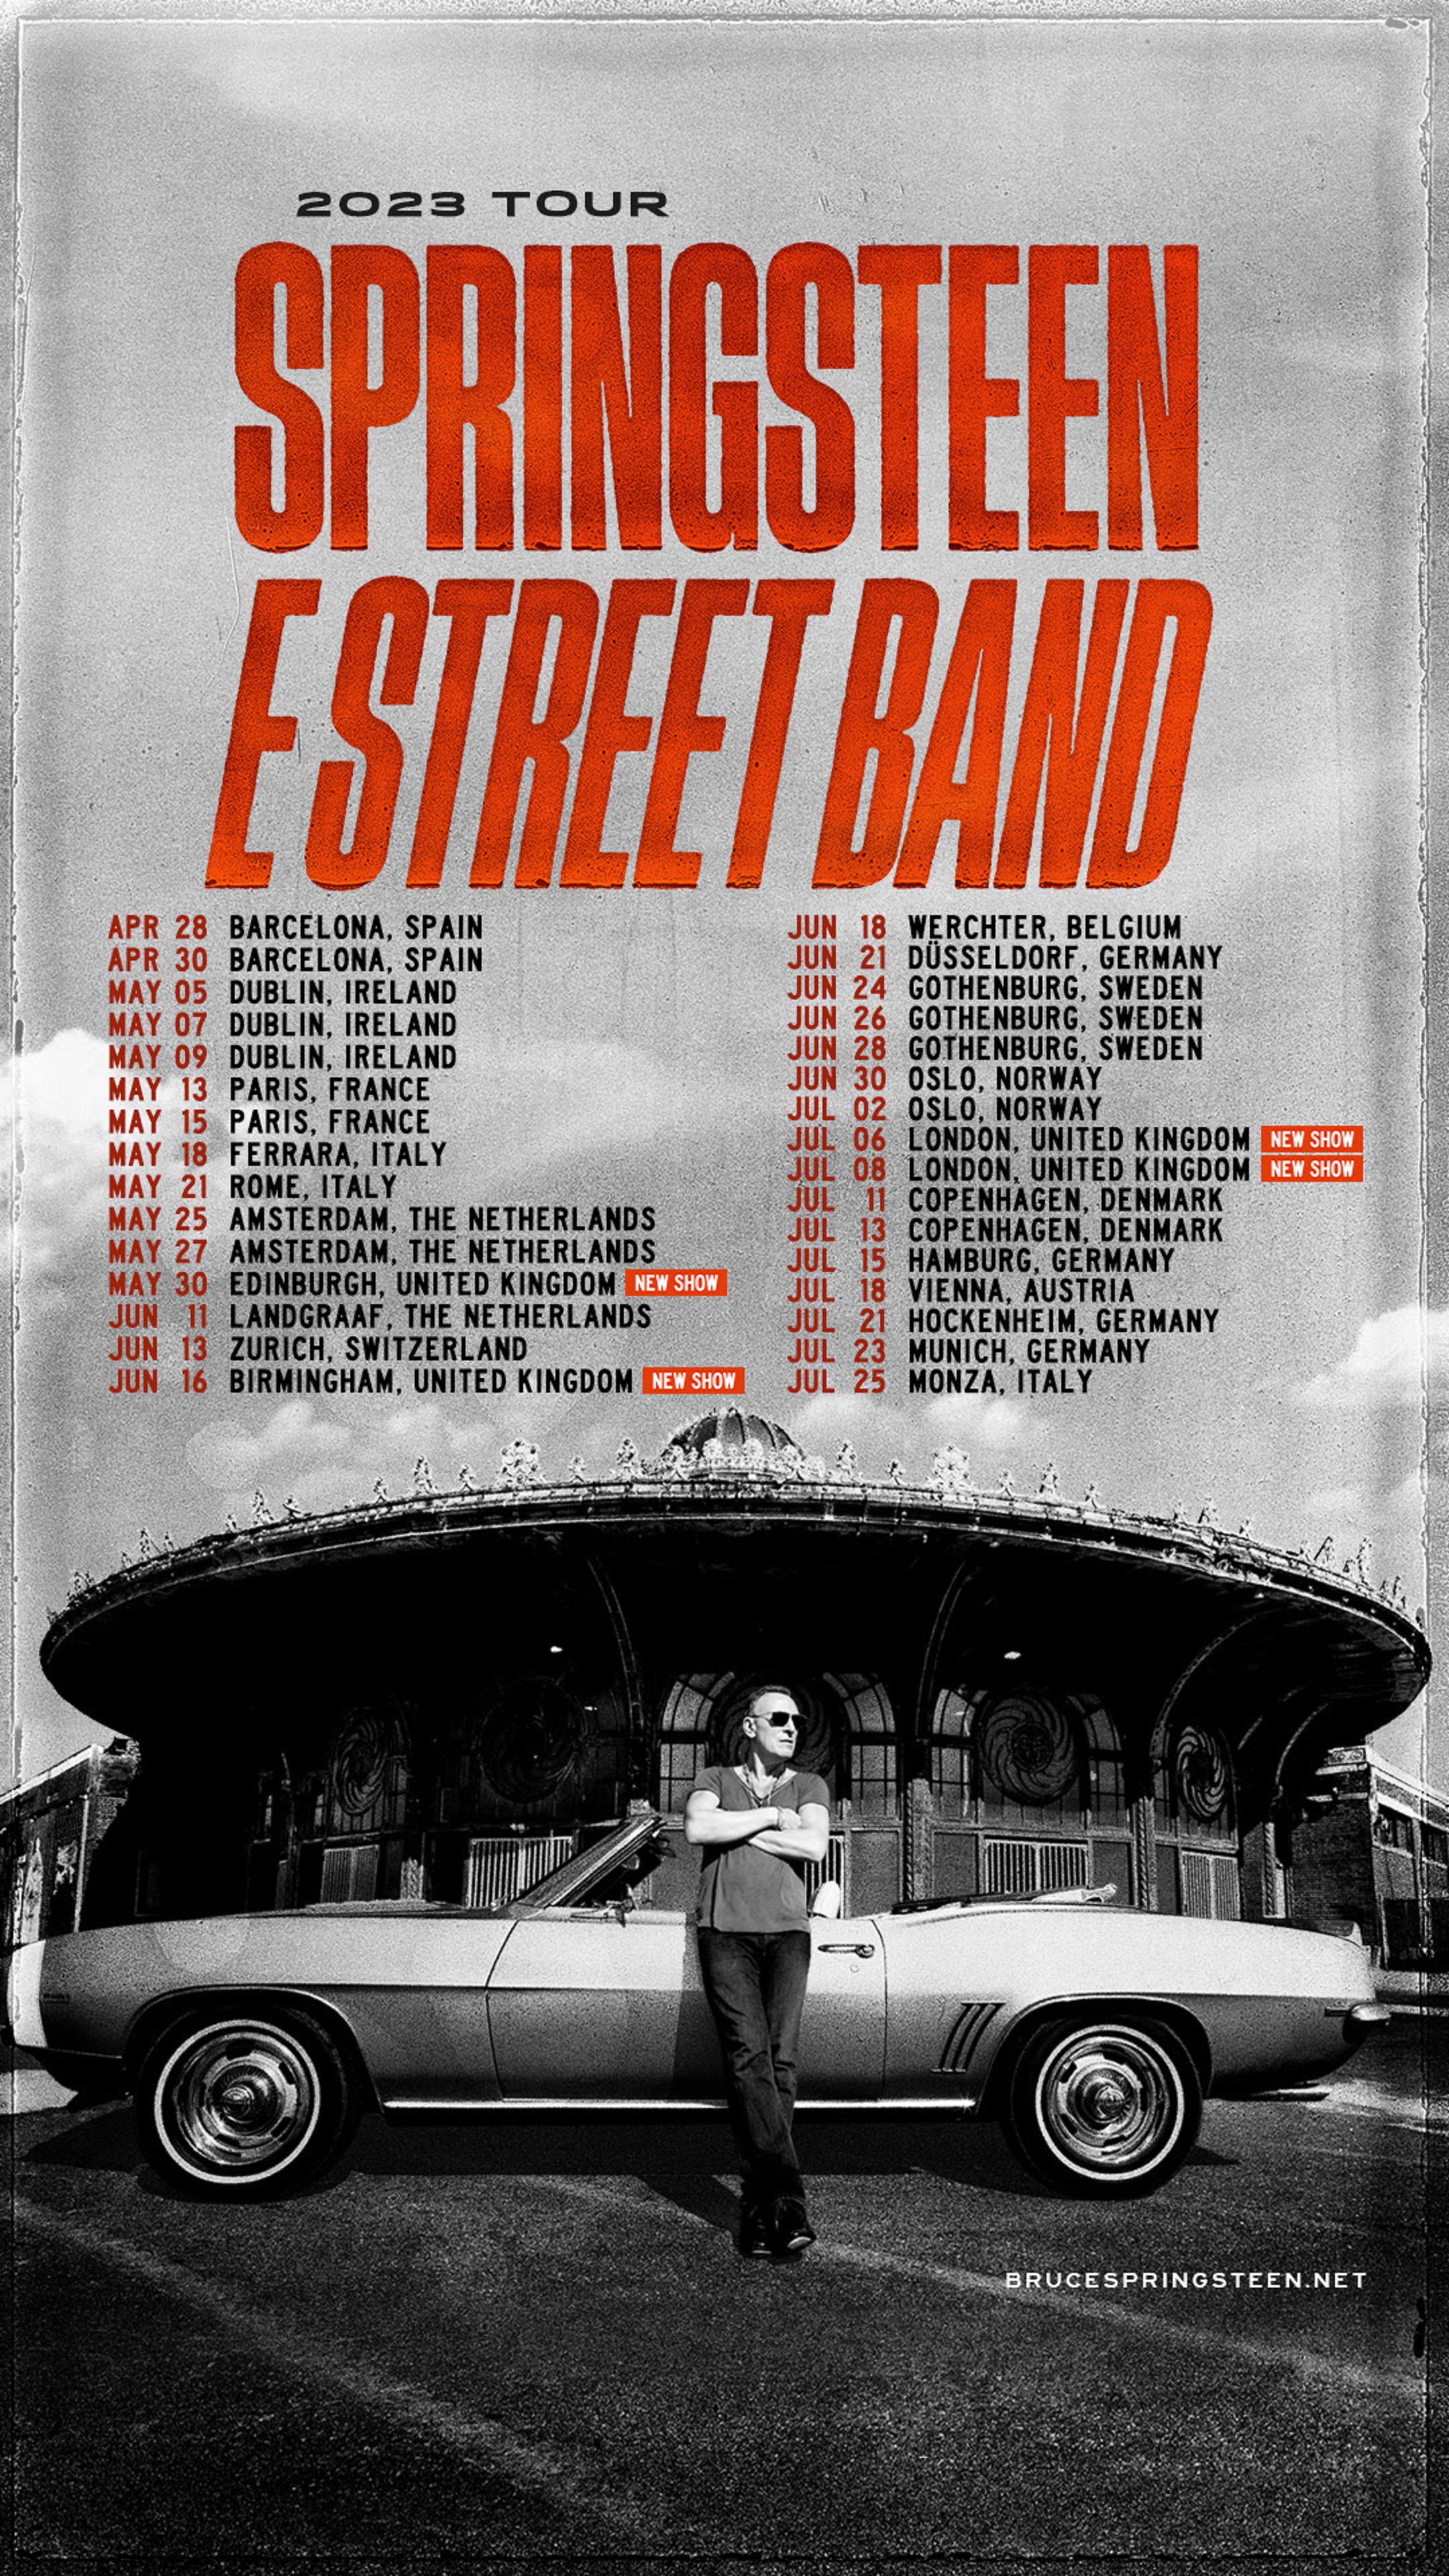 Bruce Springsteen and The E Street Band Announce Four UK Dates on 2023 International Tour